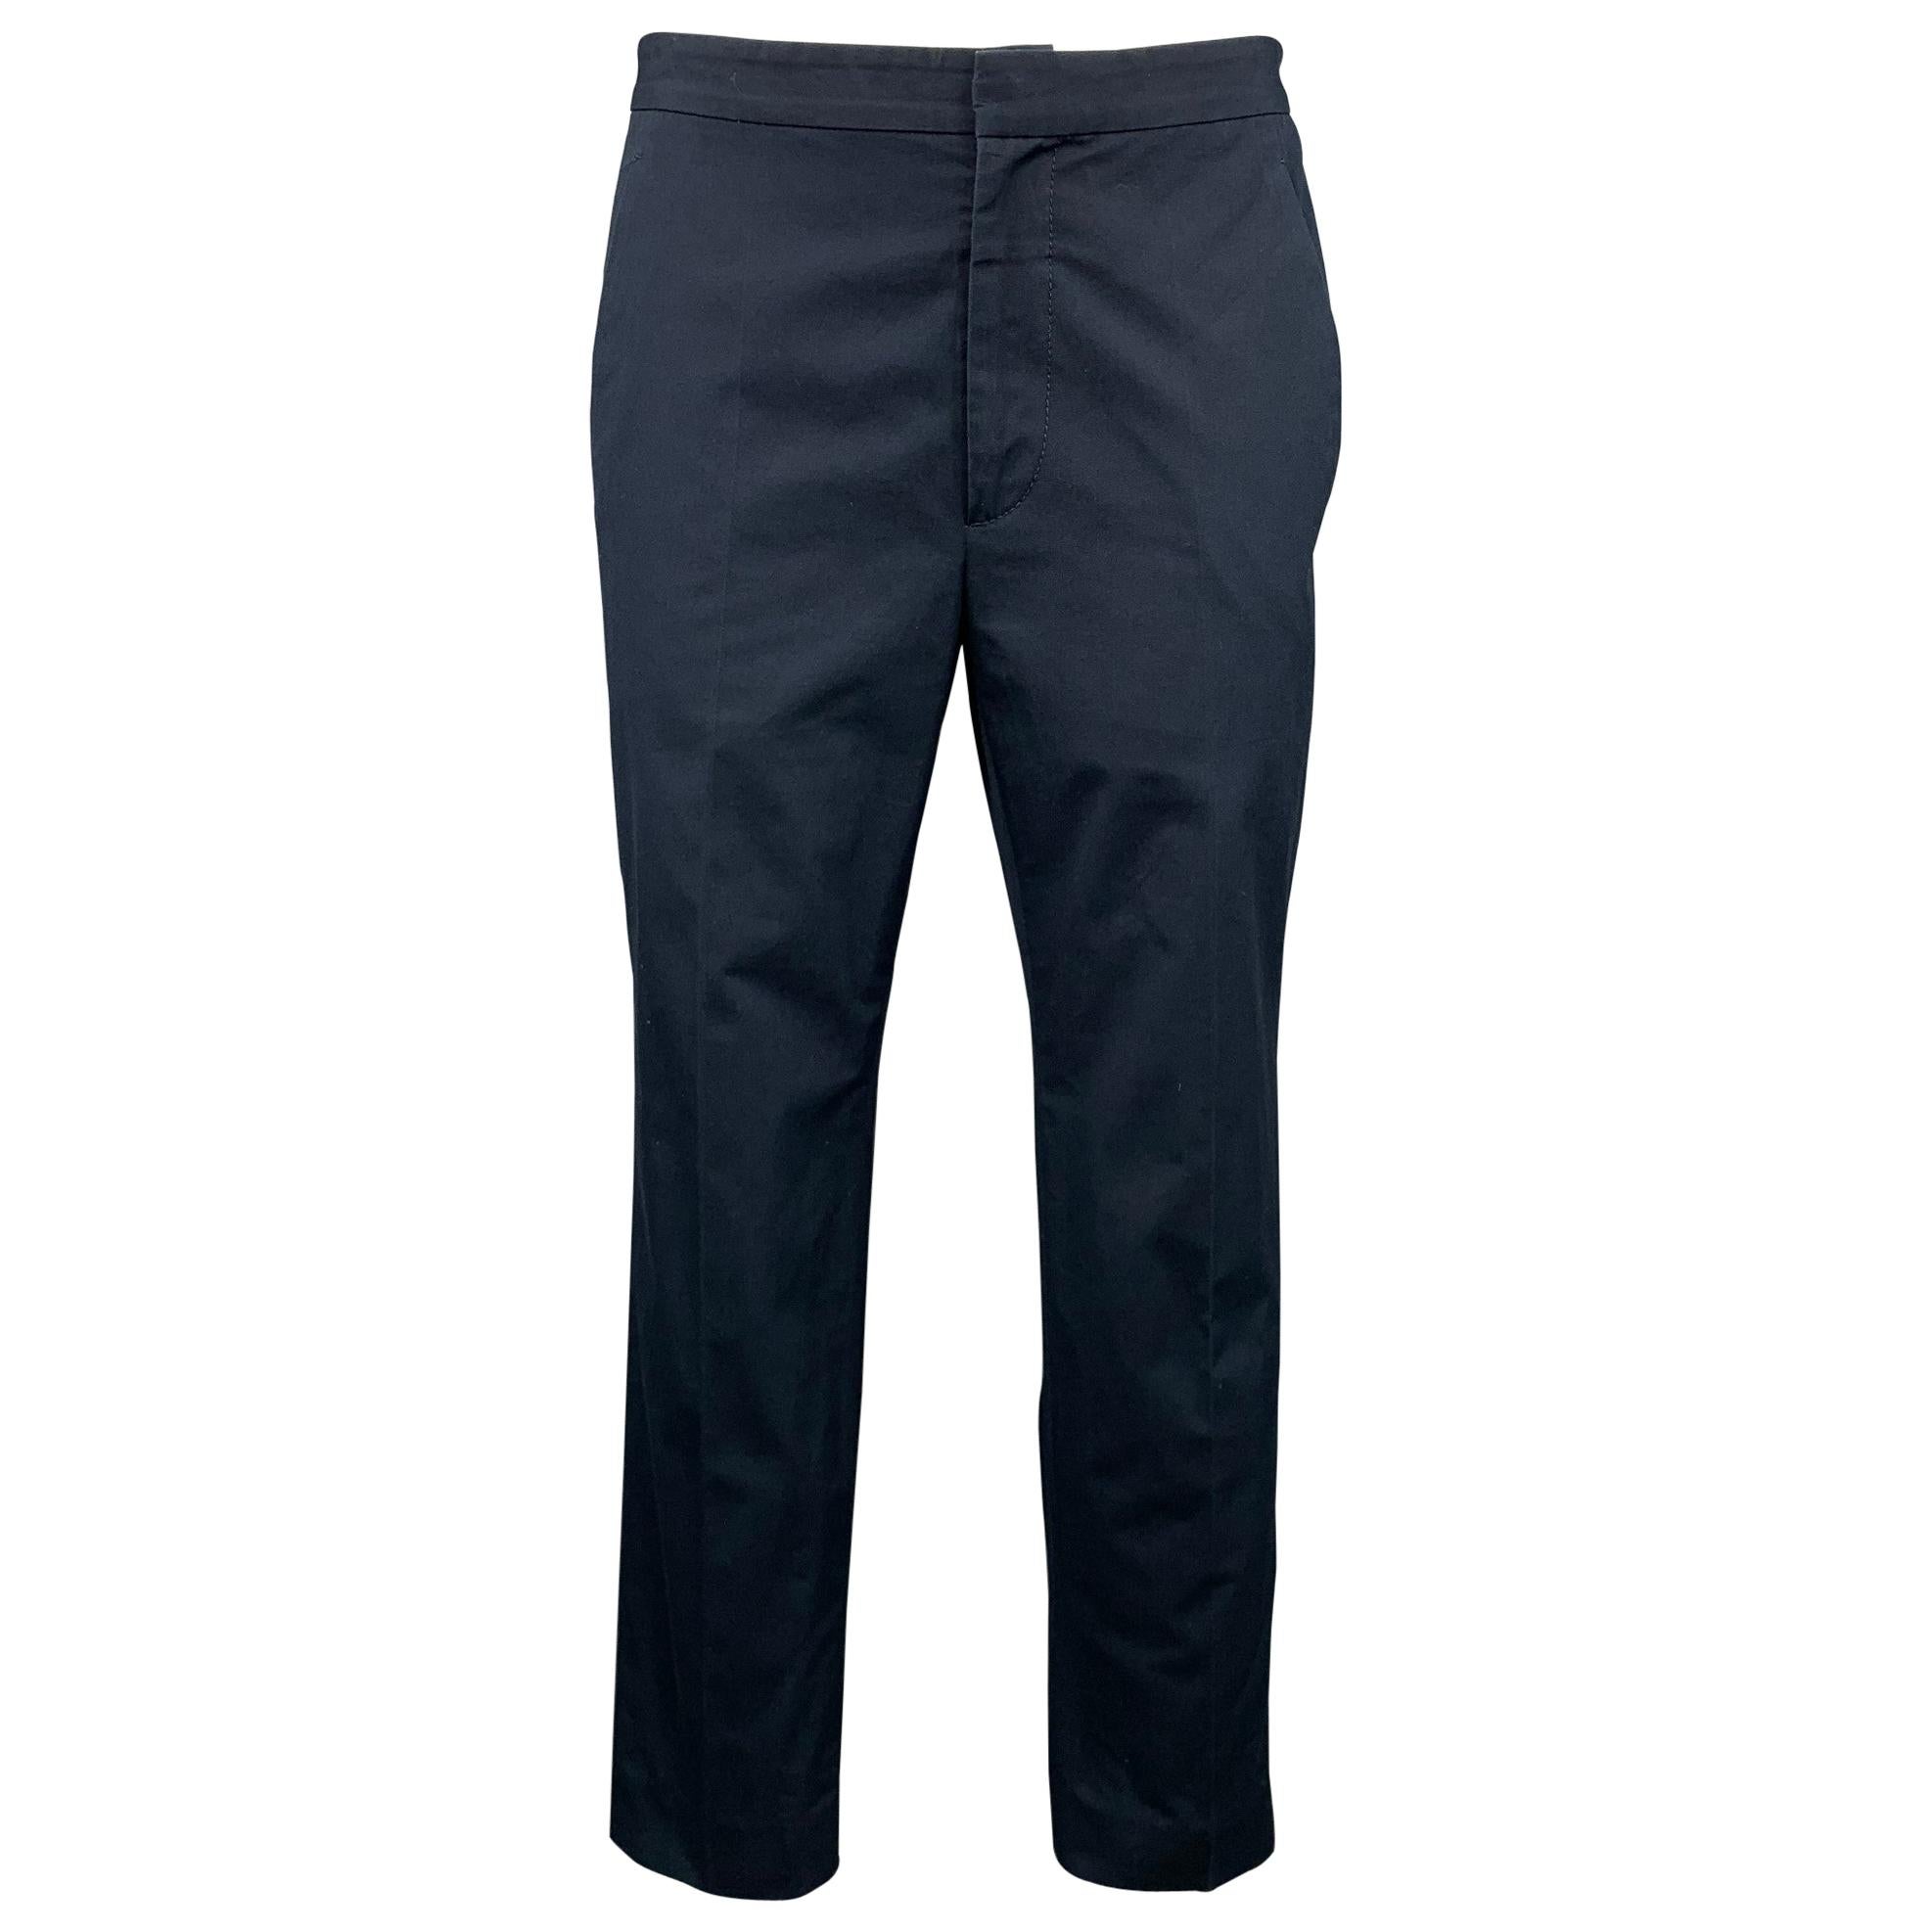 MARC JACOBS Size 0 Navy Cotton Chino Casual Pants